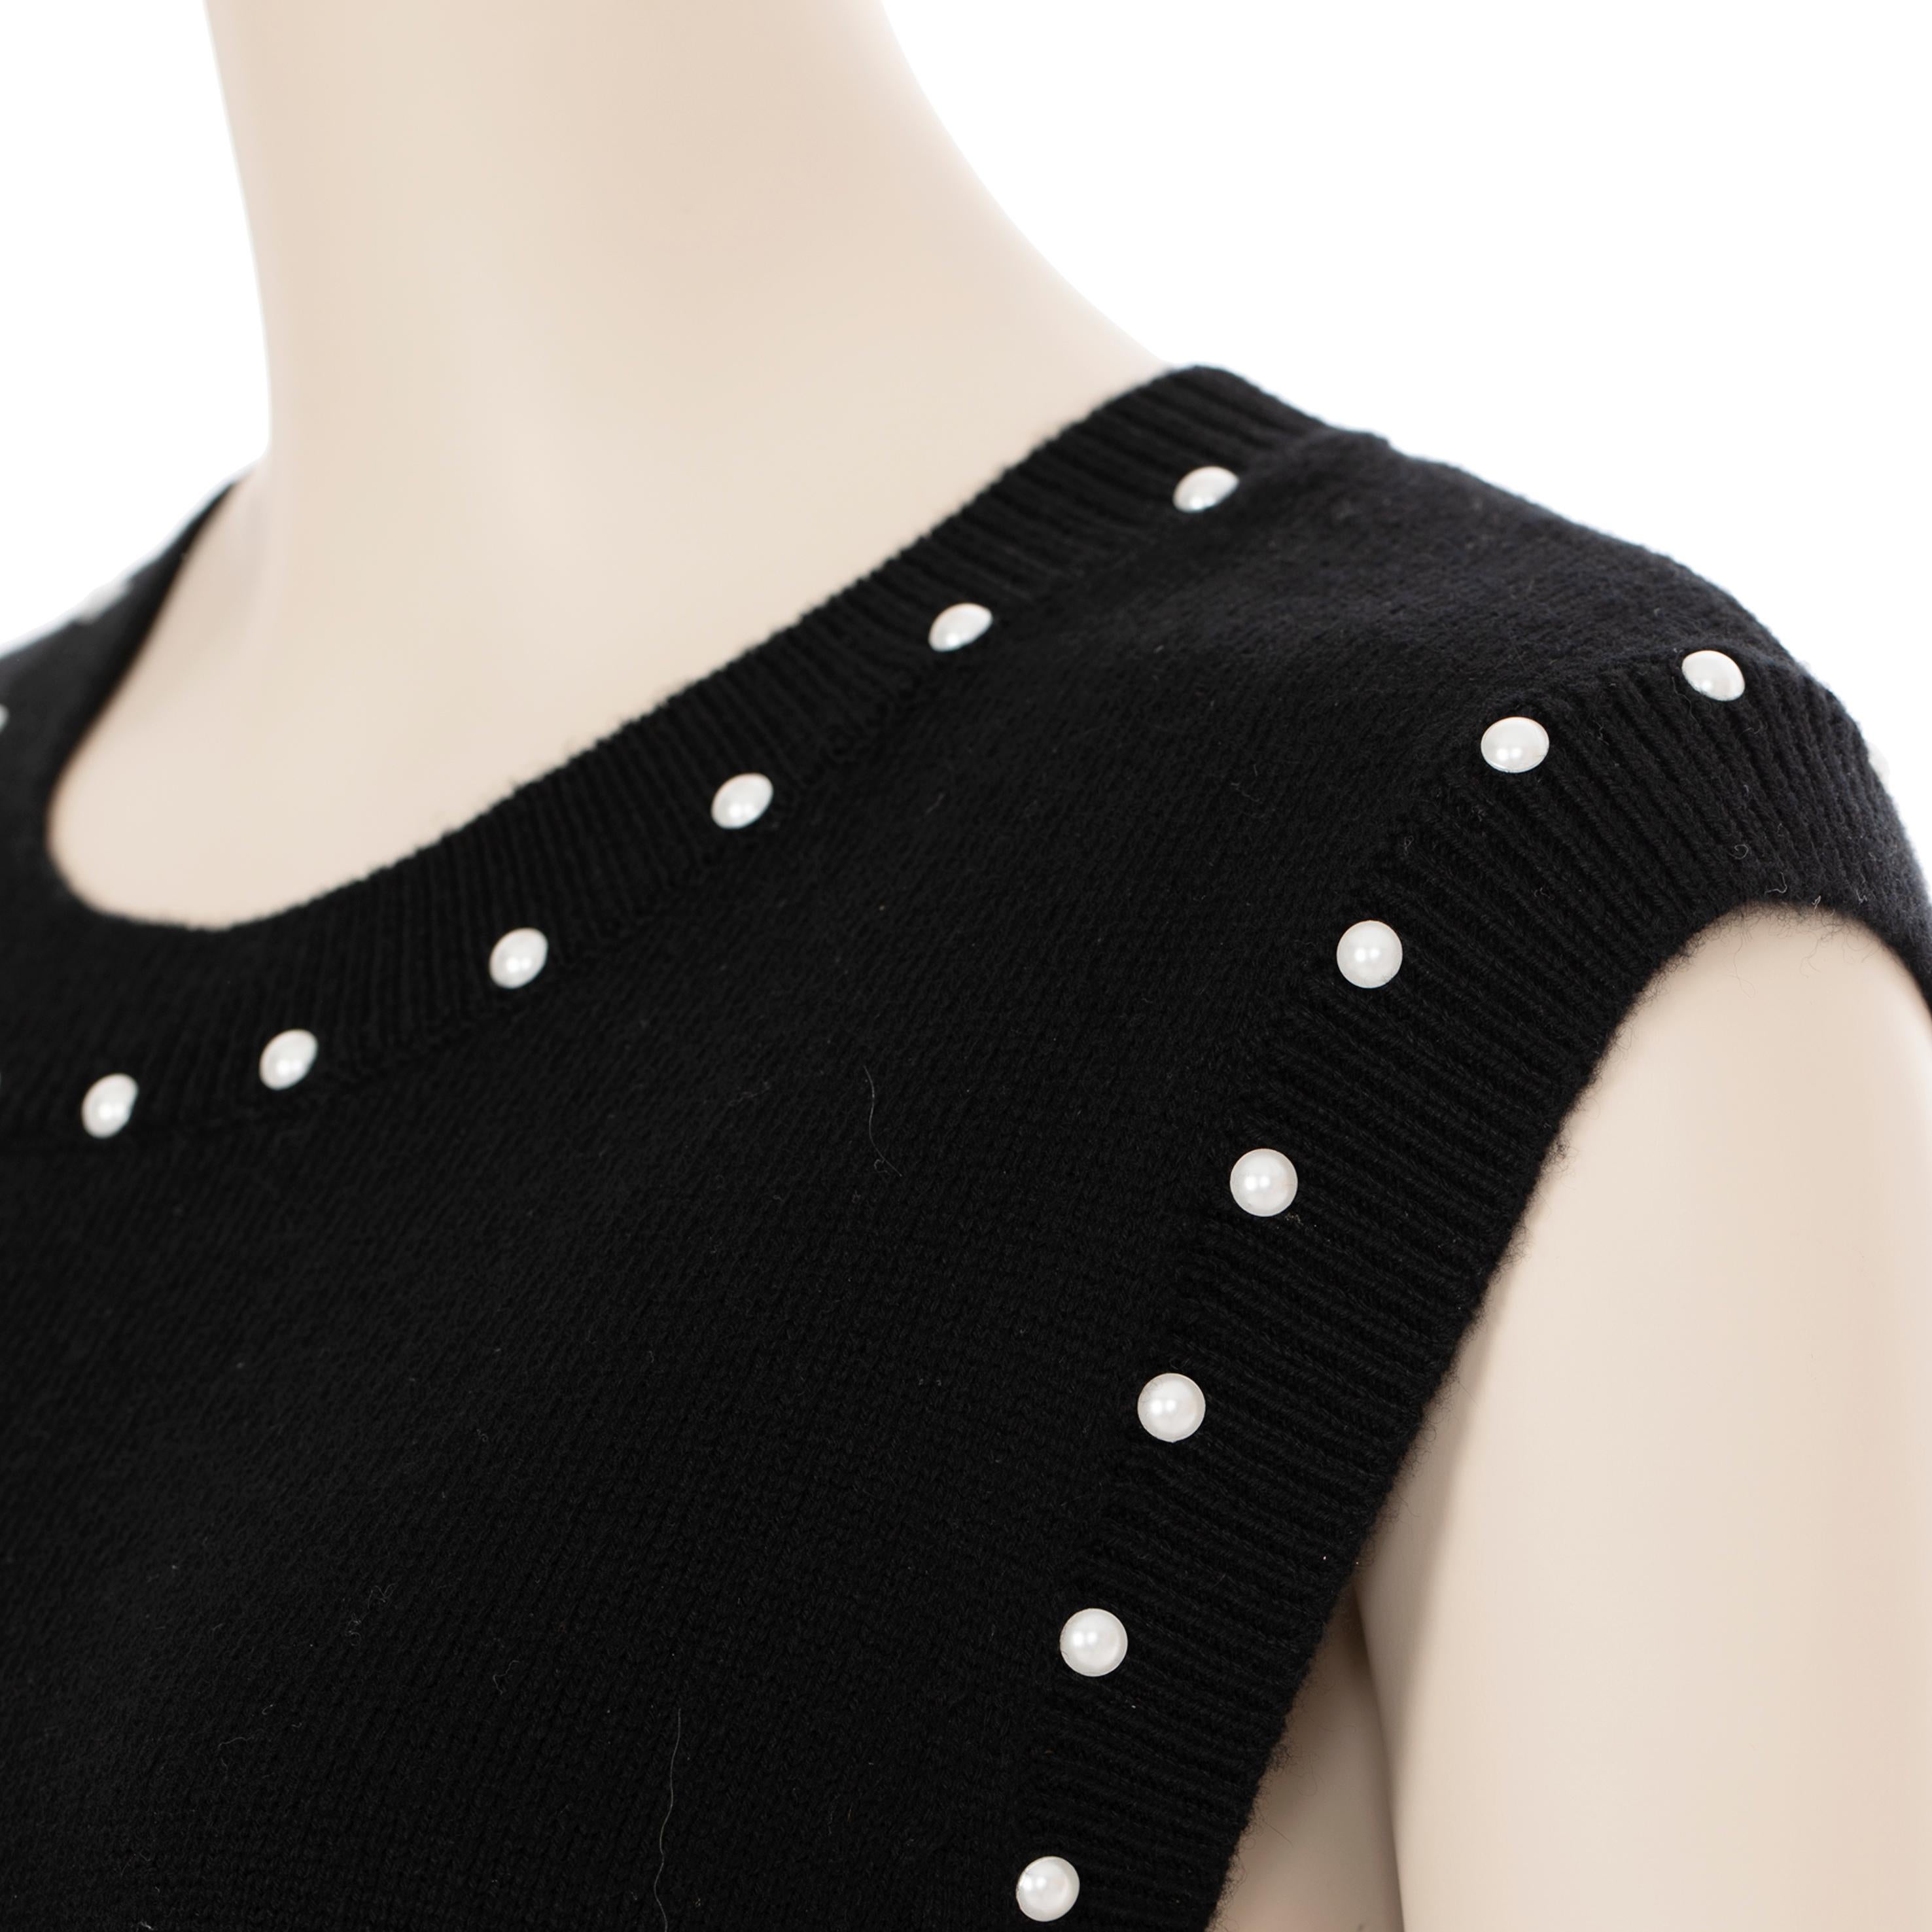 Chanel Black Knit Dress With Faux Pearl Details 40 FR For Sale 4